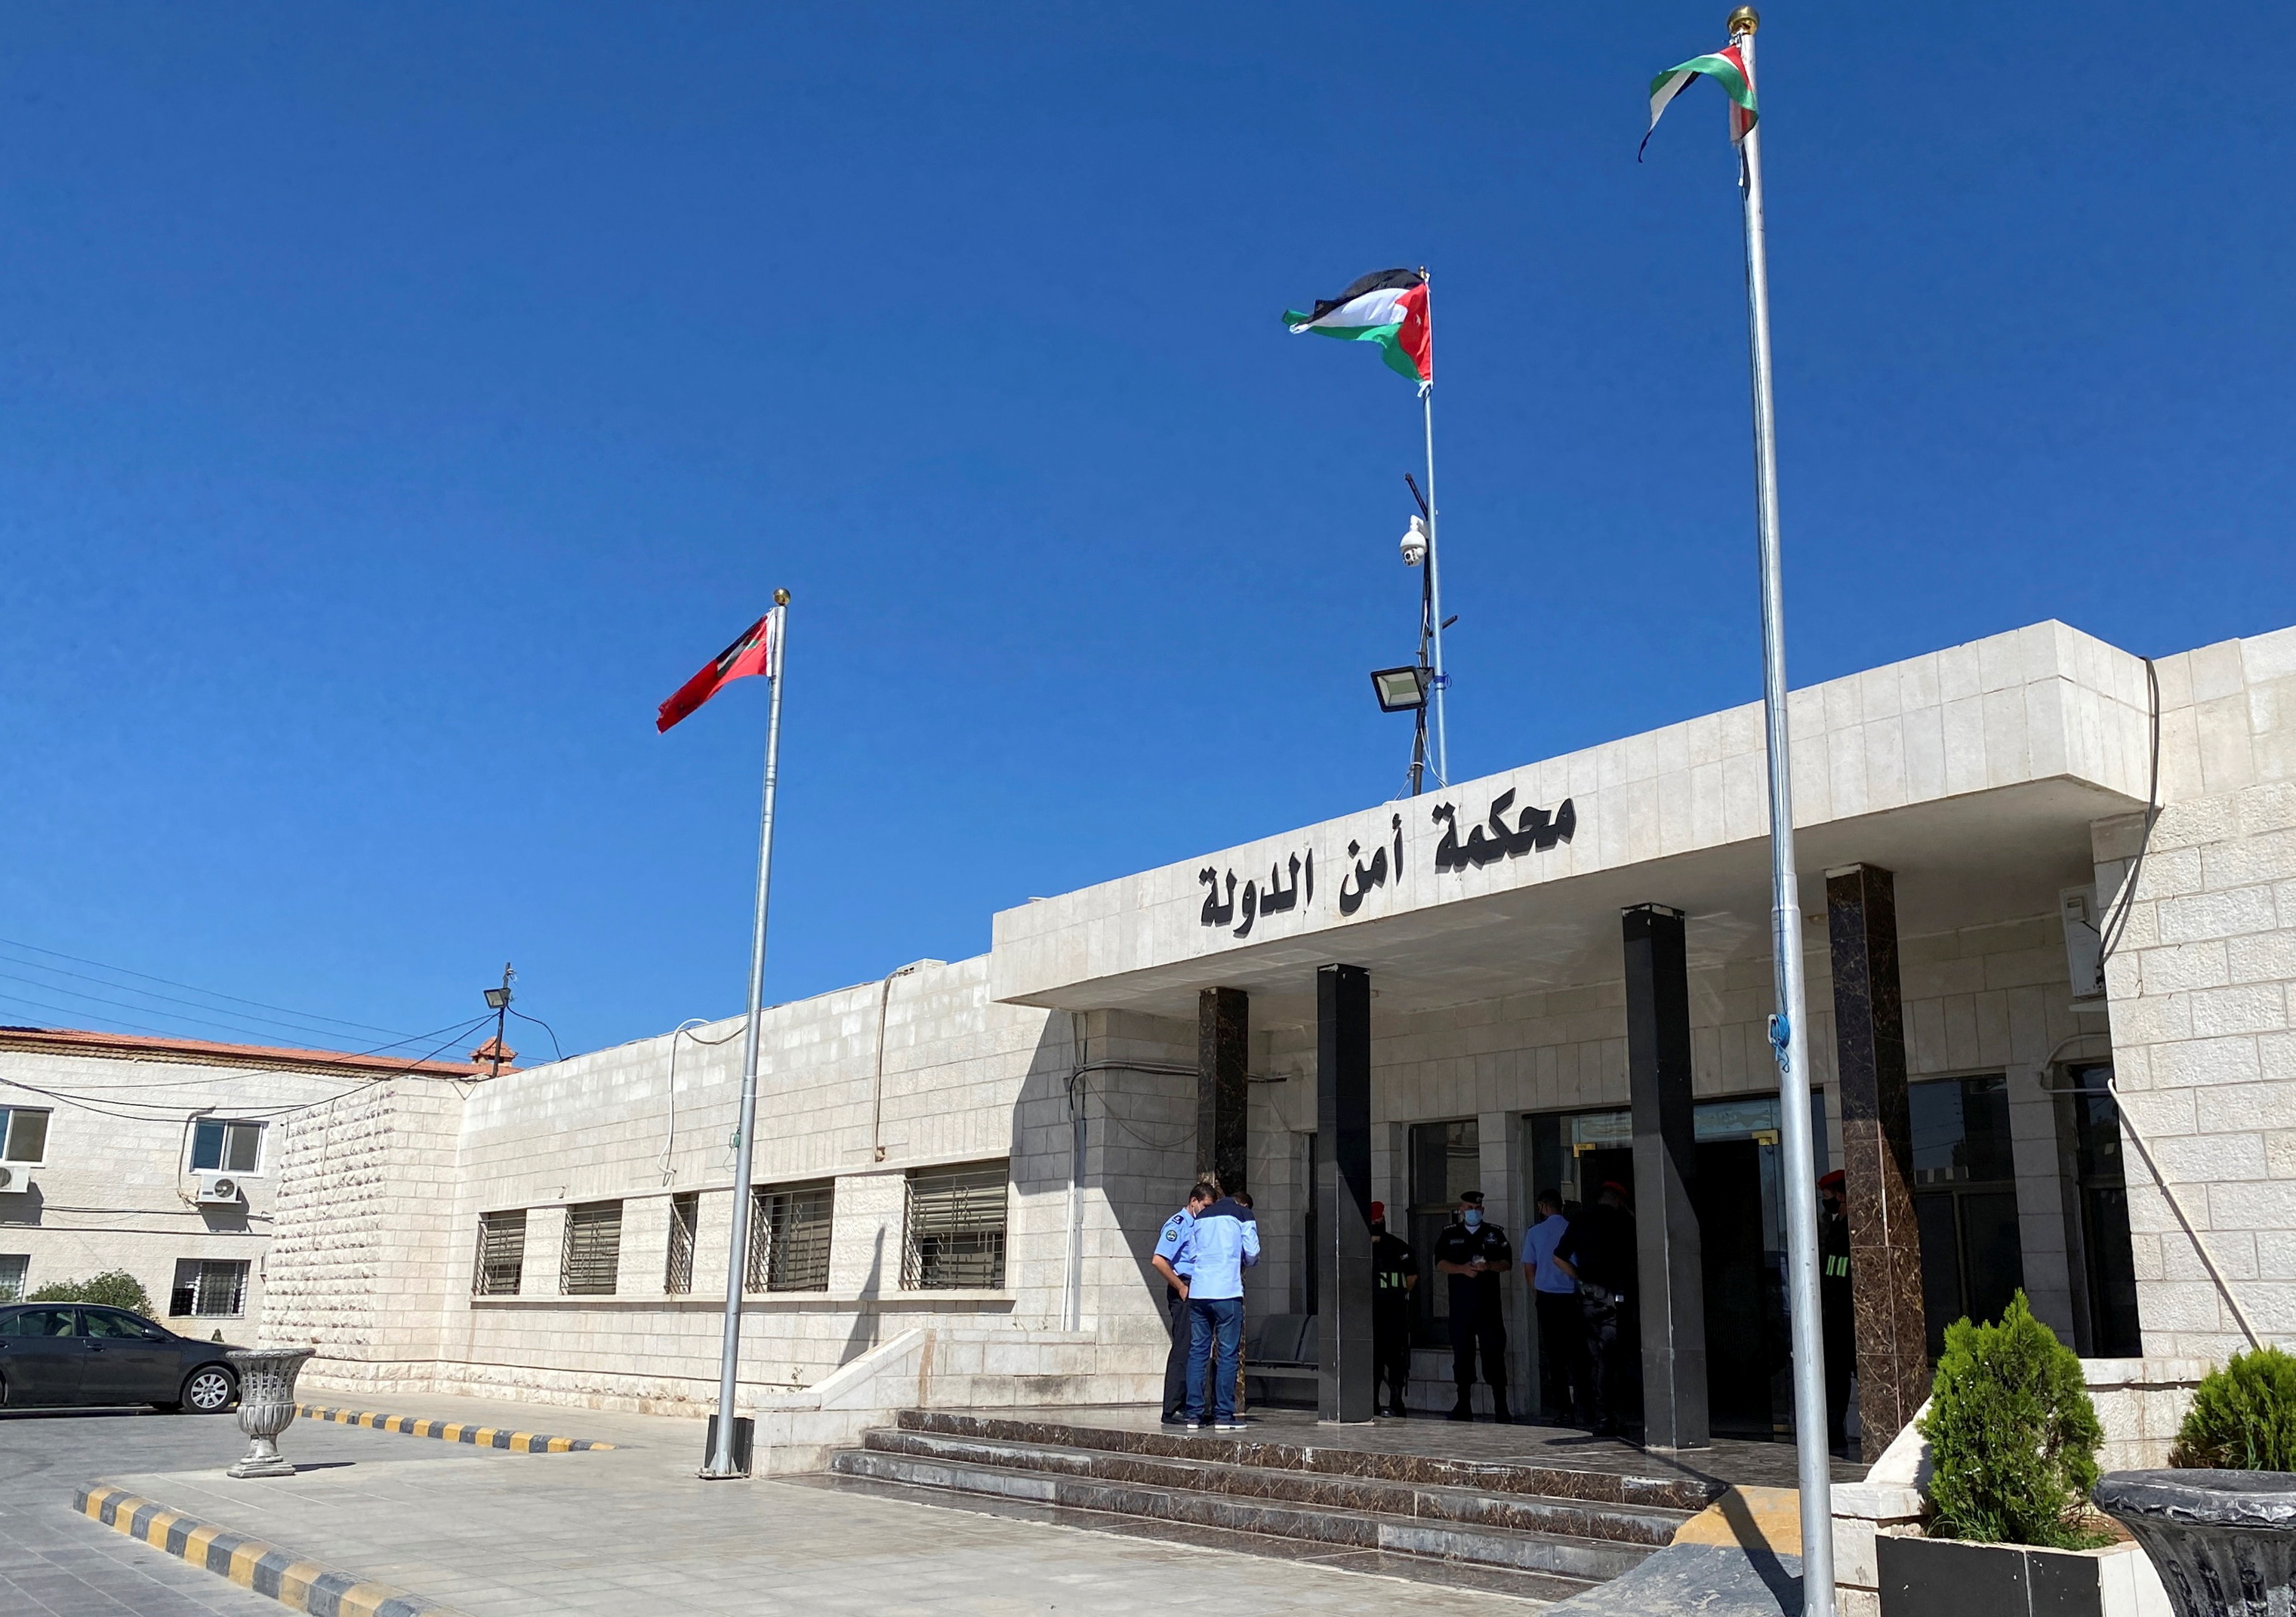 A general view shows the exterior of a security court in Amman